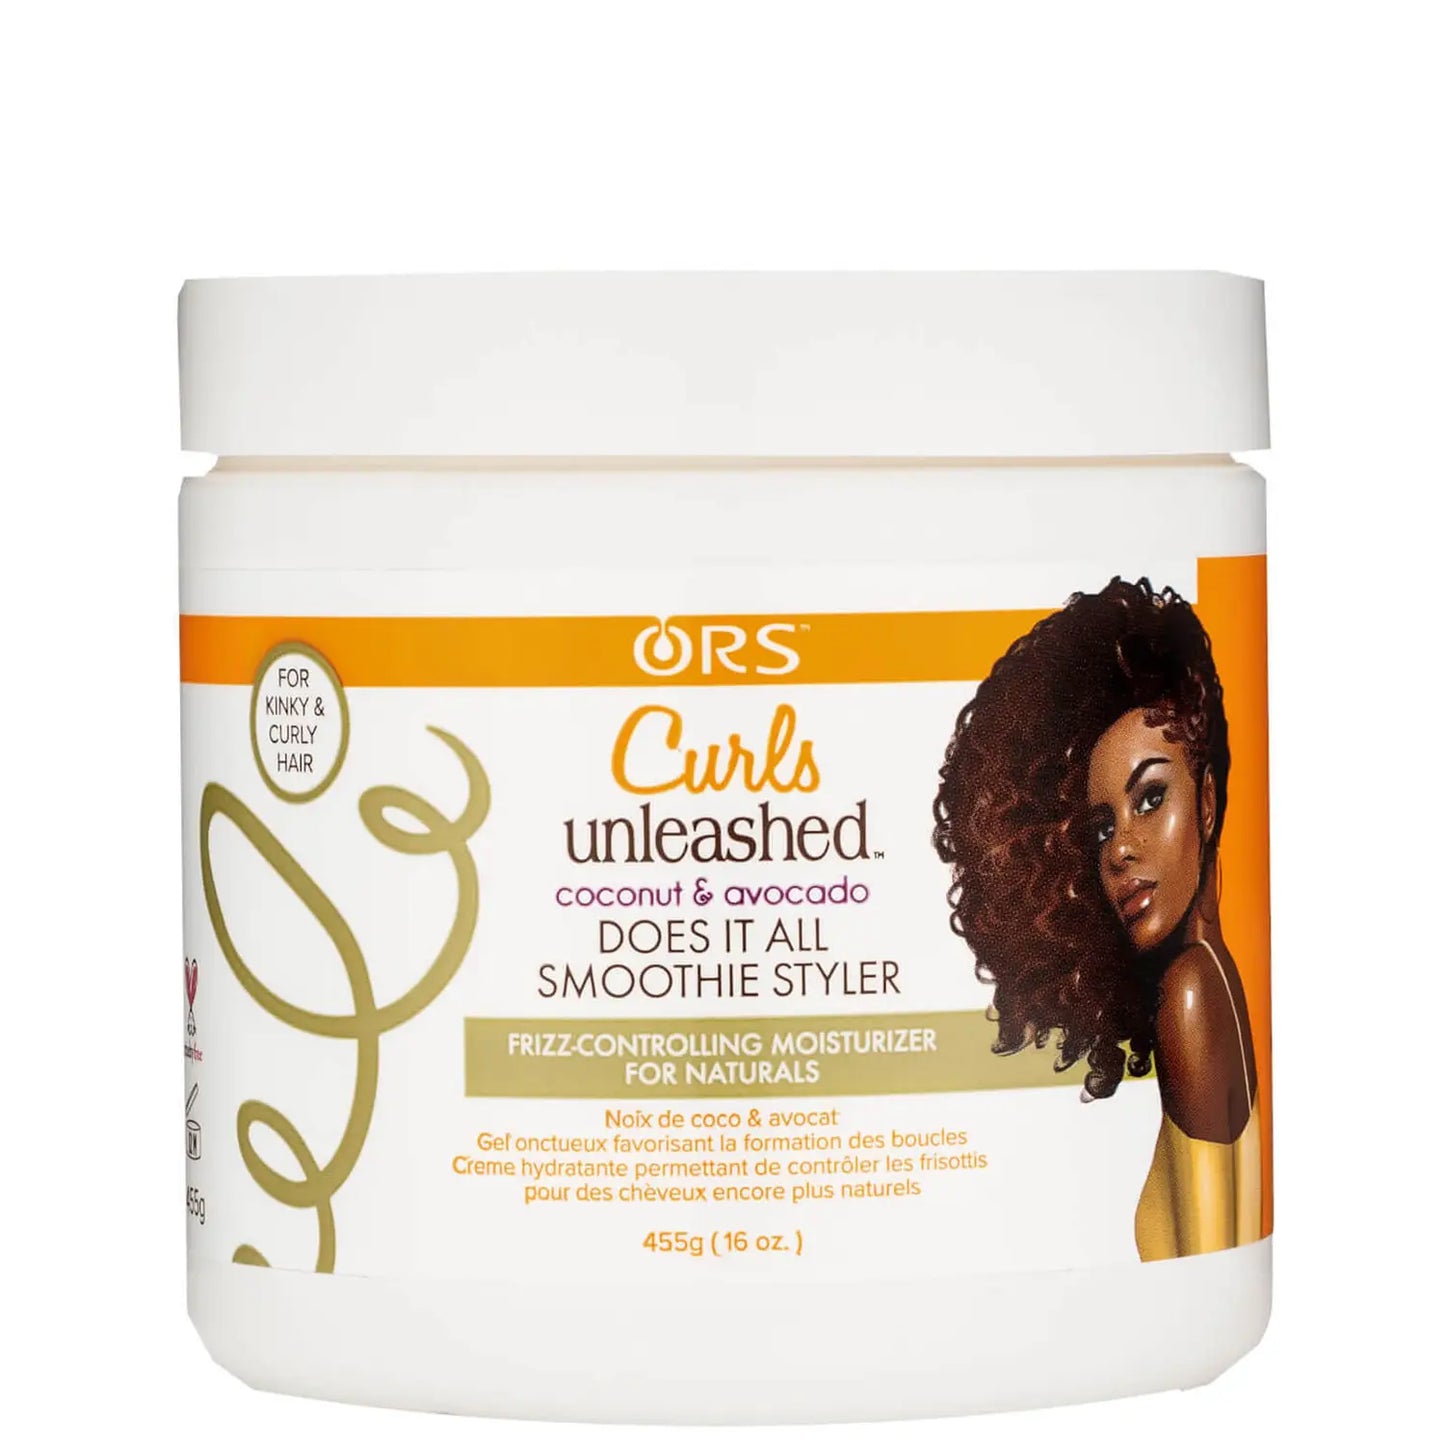 Ors Curls Unleashed Coconut & Avocado Curl Smoothie - 16 Oz